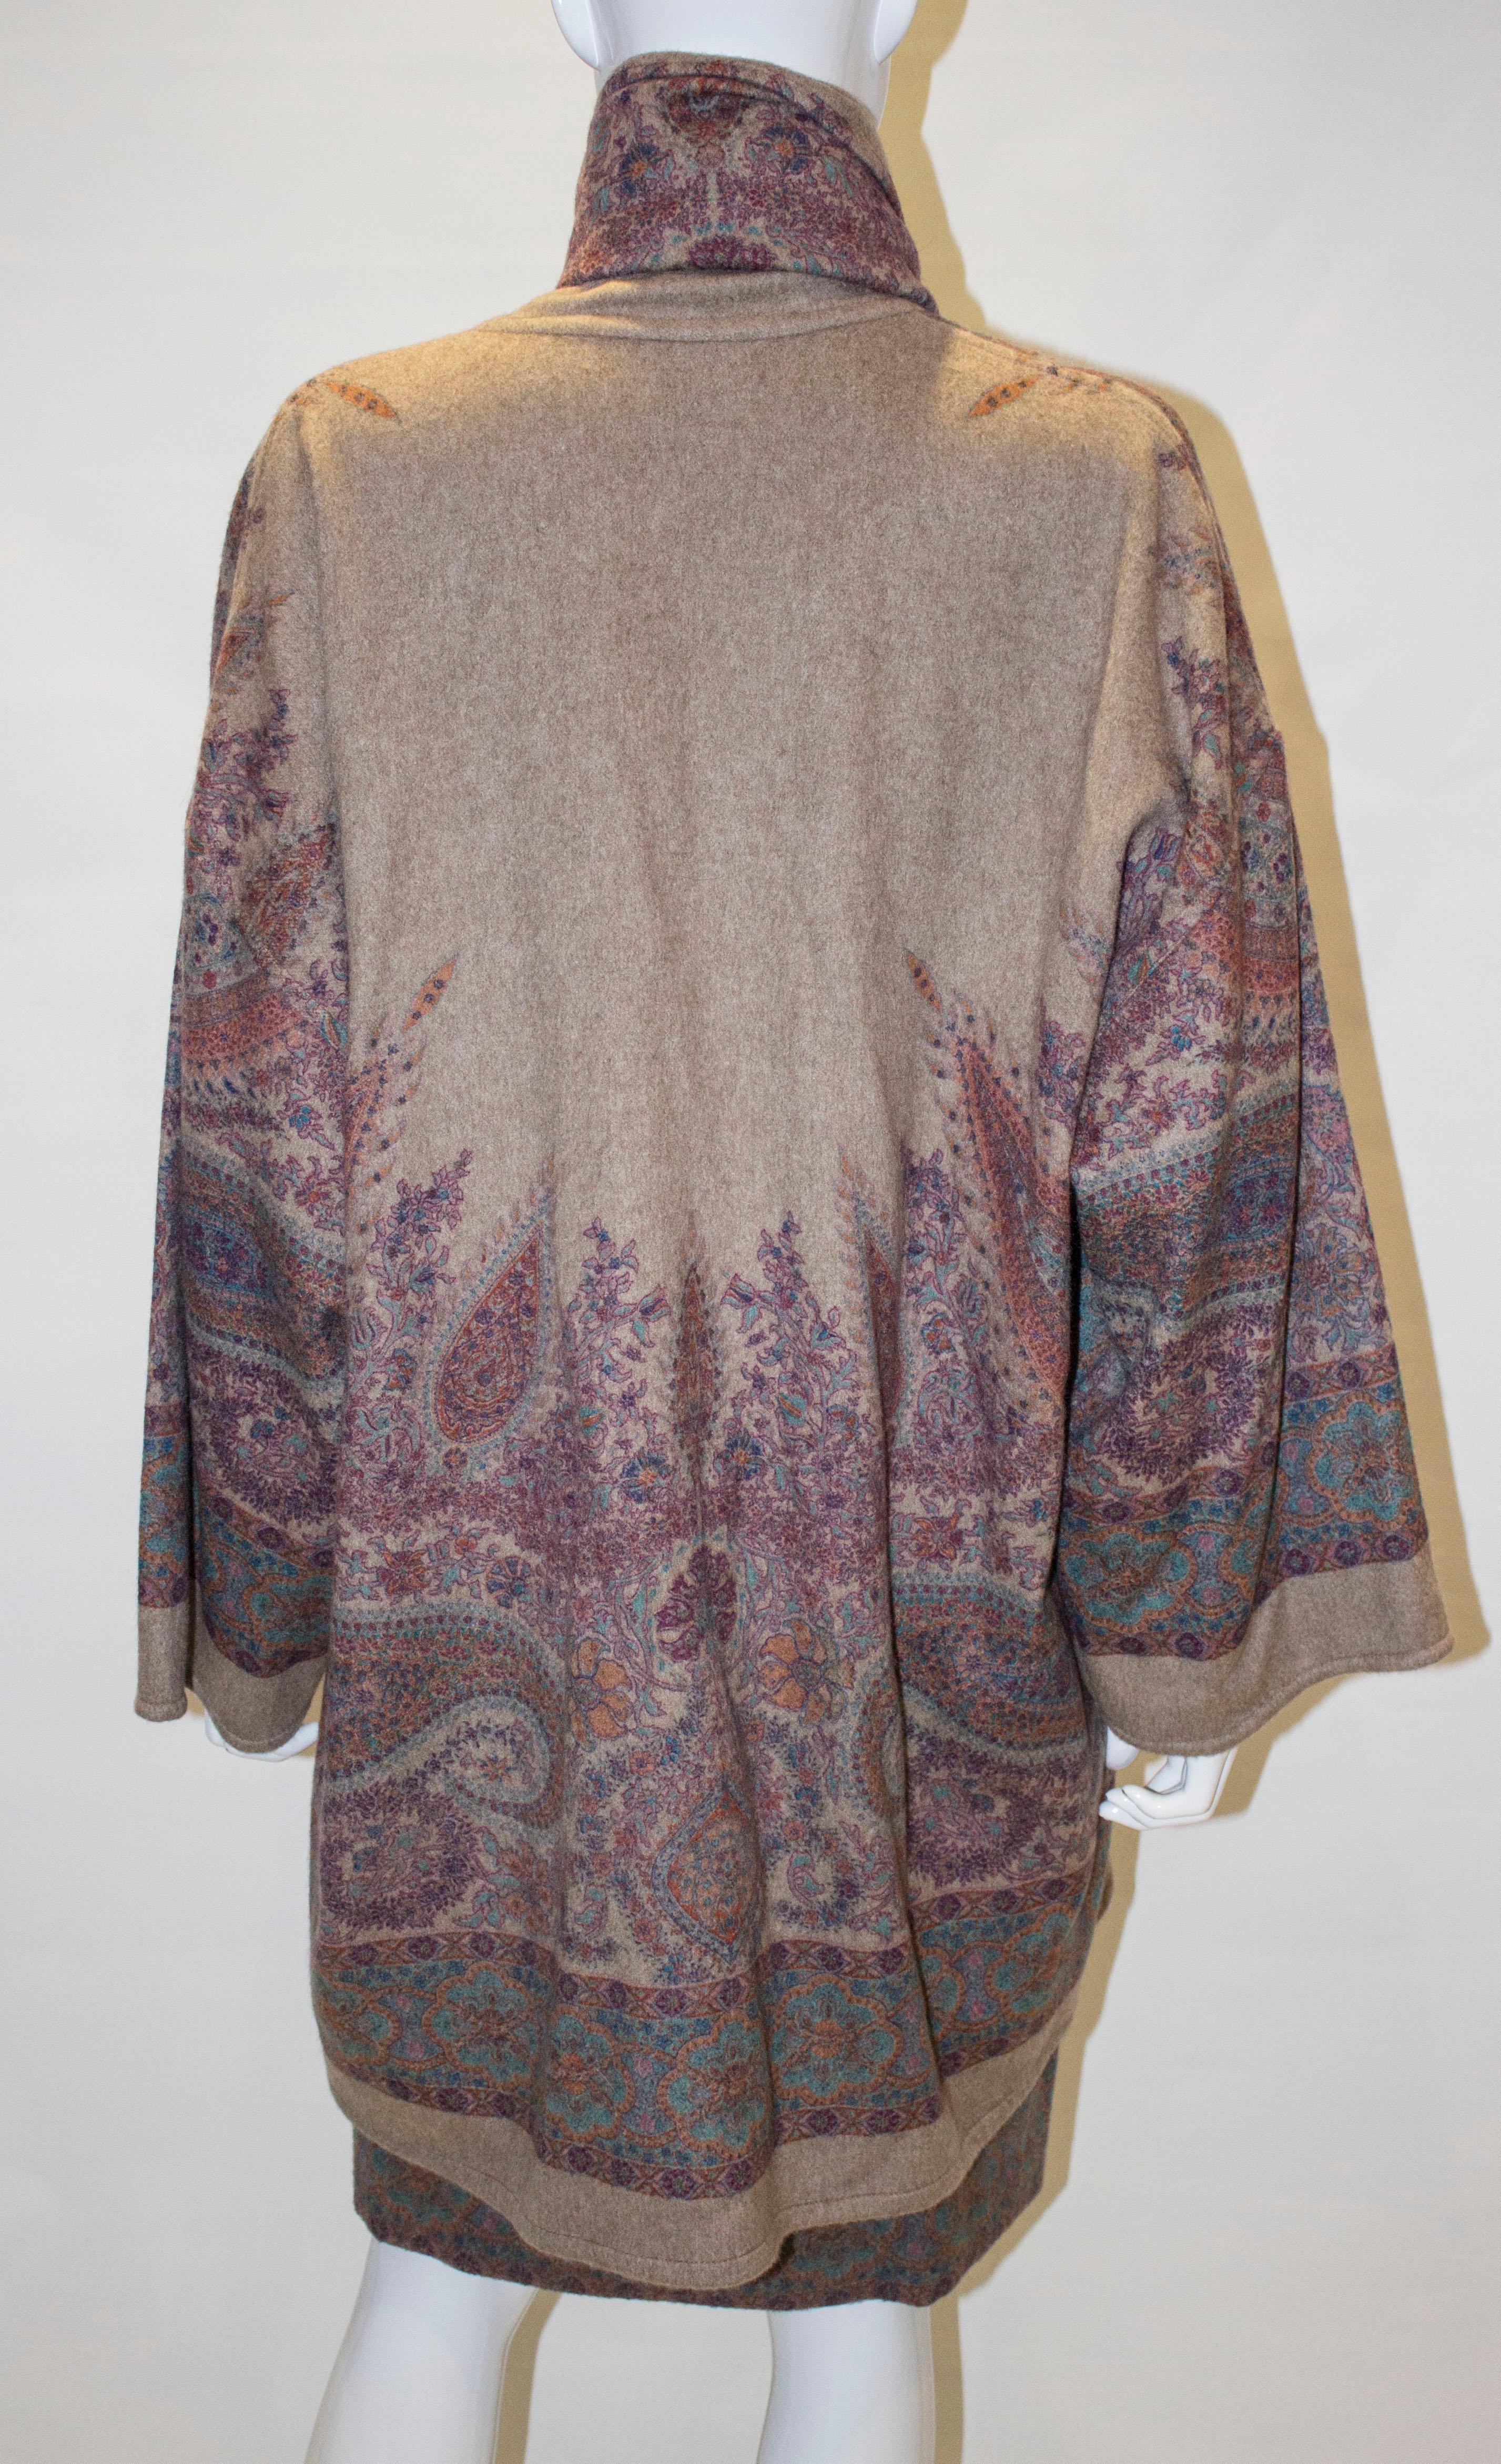 Vintage Cashmere Jacket with Paisley Print For Sale 3